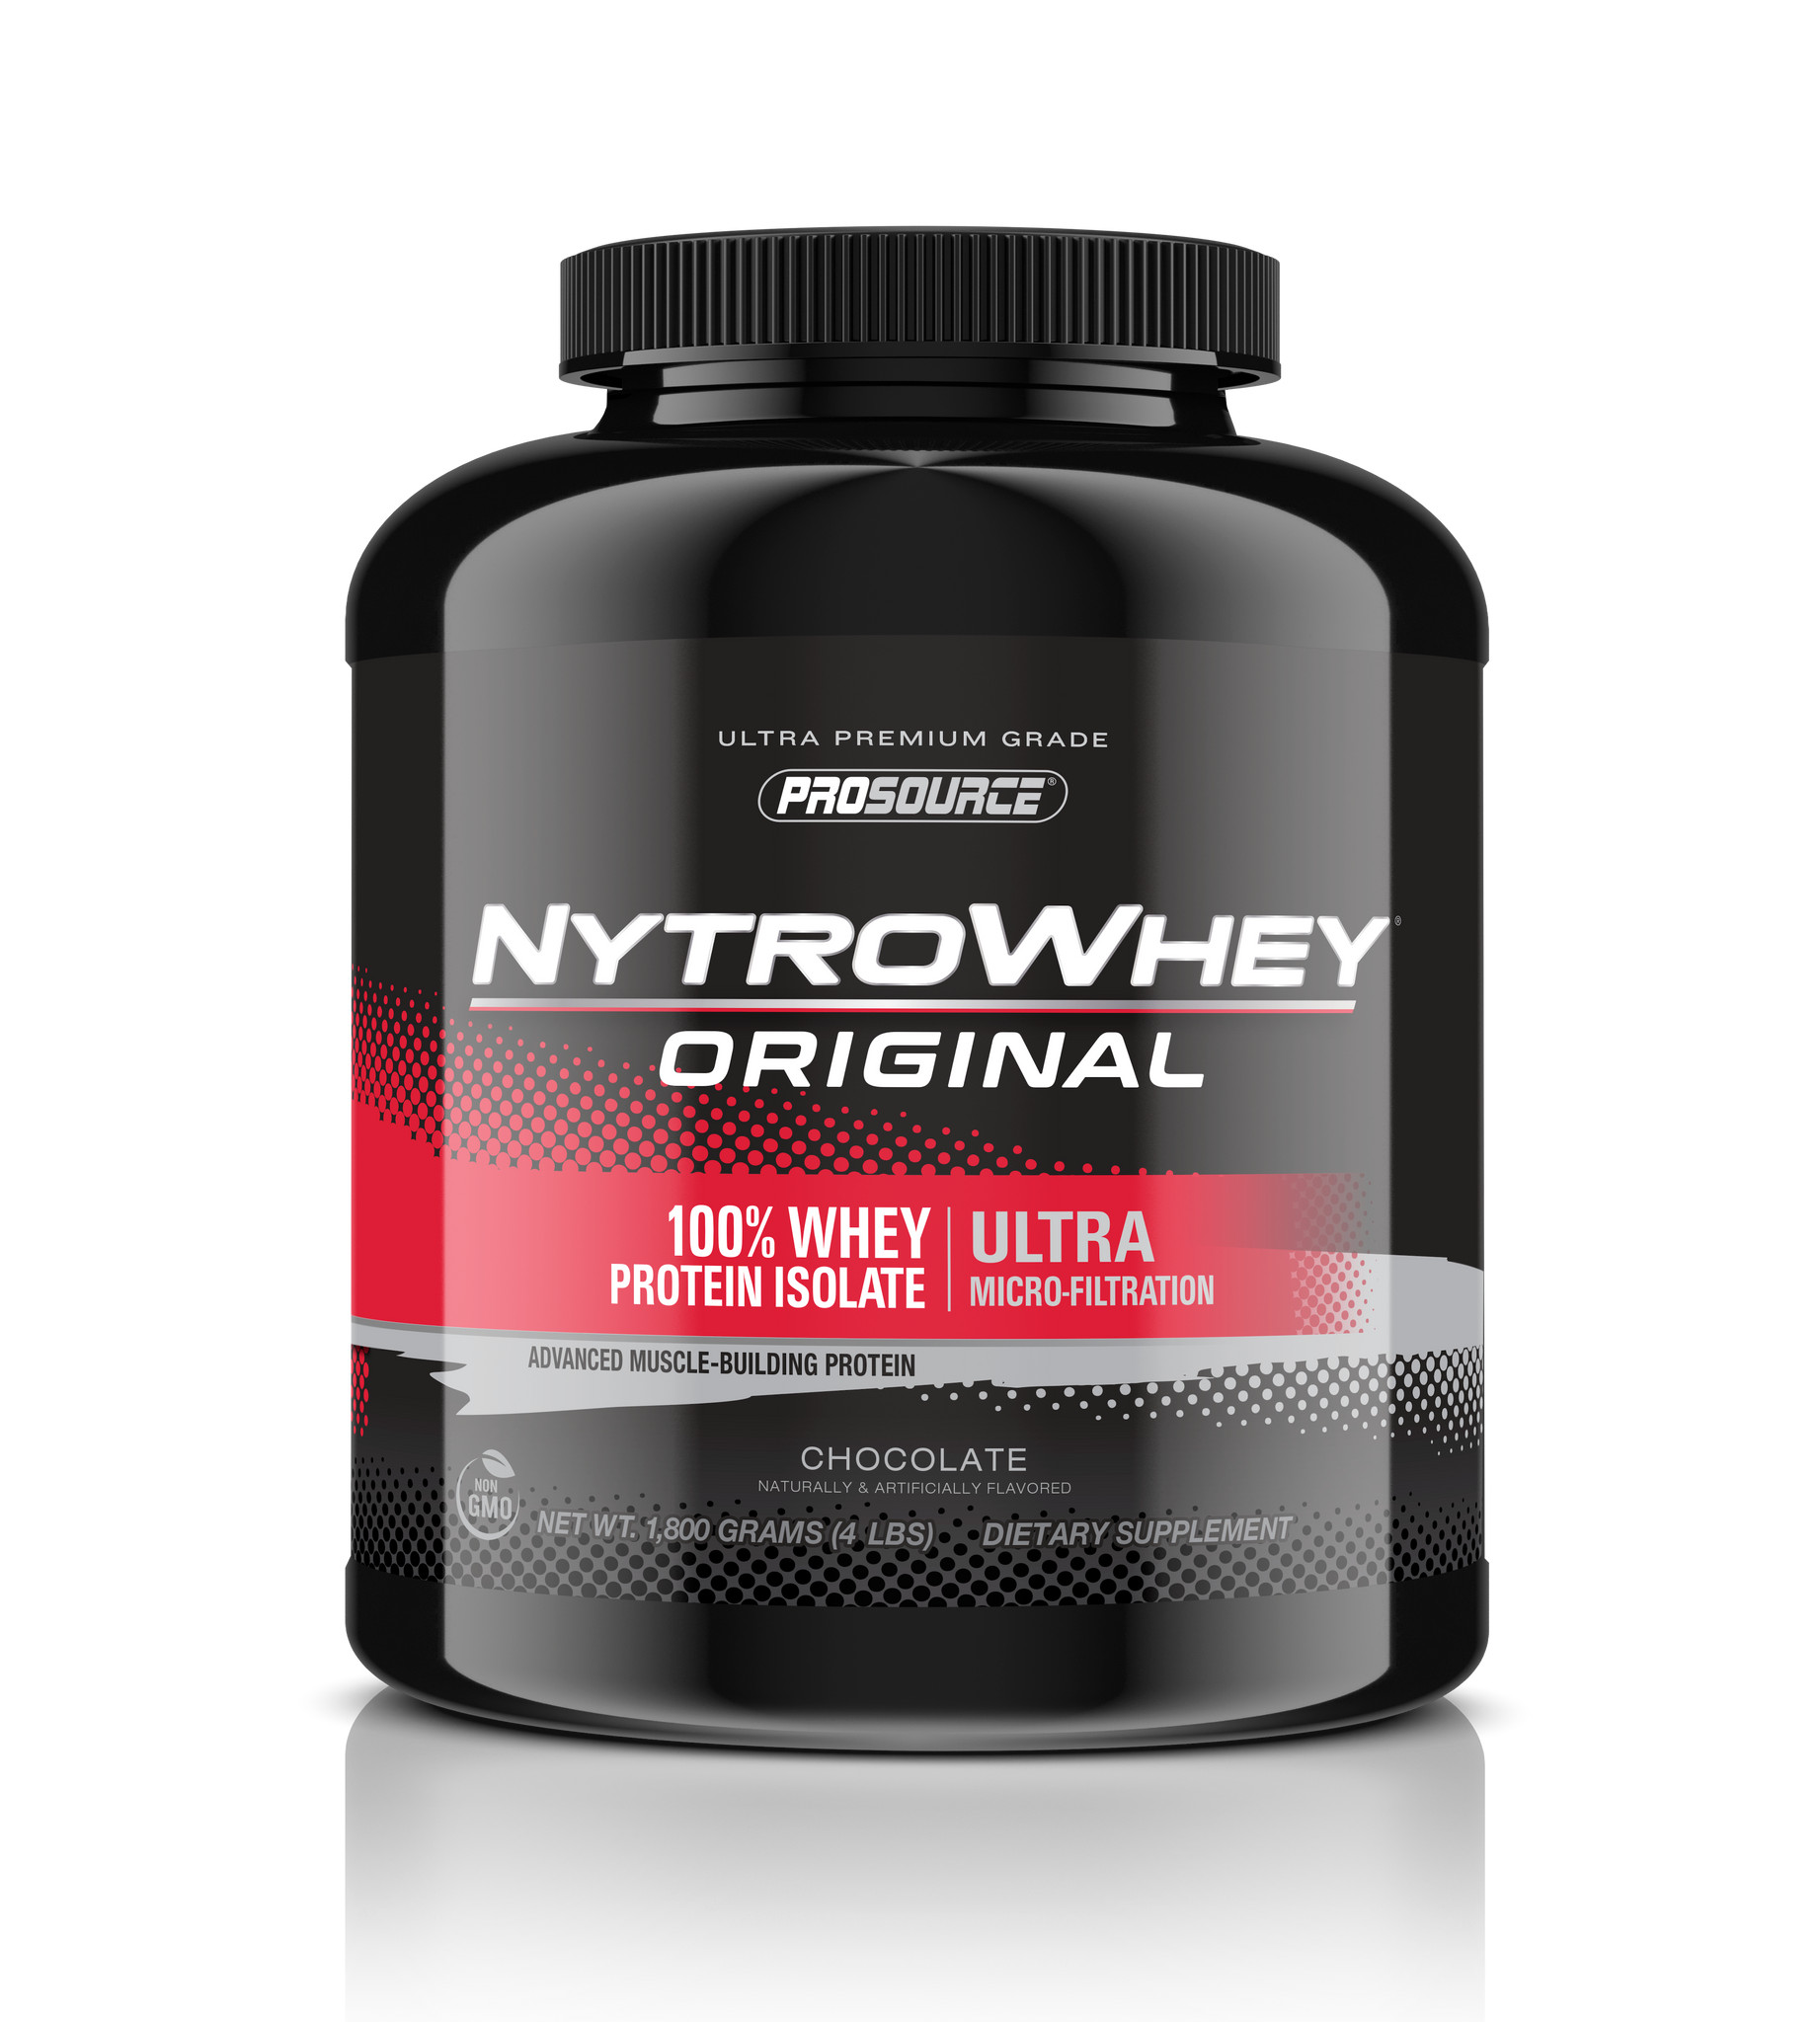 NytroWhey Original 100% whey protein isolate ultra micro filtration advanced muscle building protein net weight 4 lbs chocolate